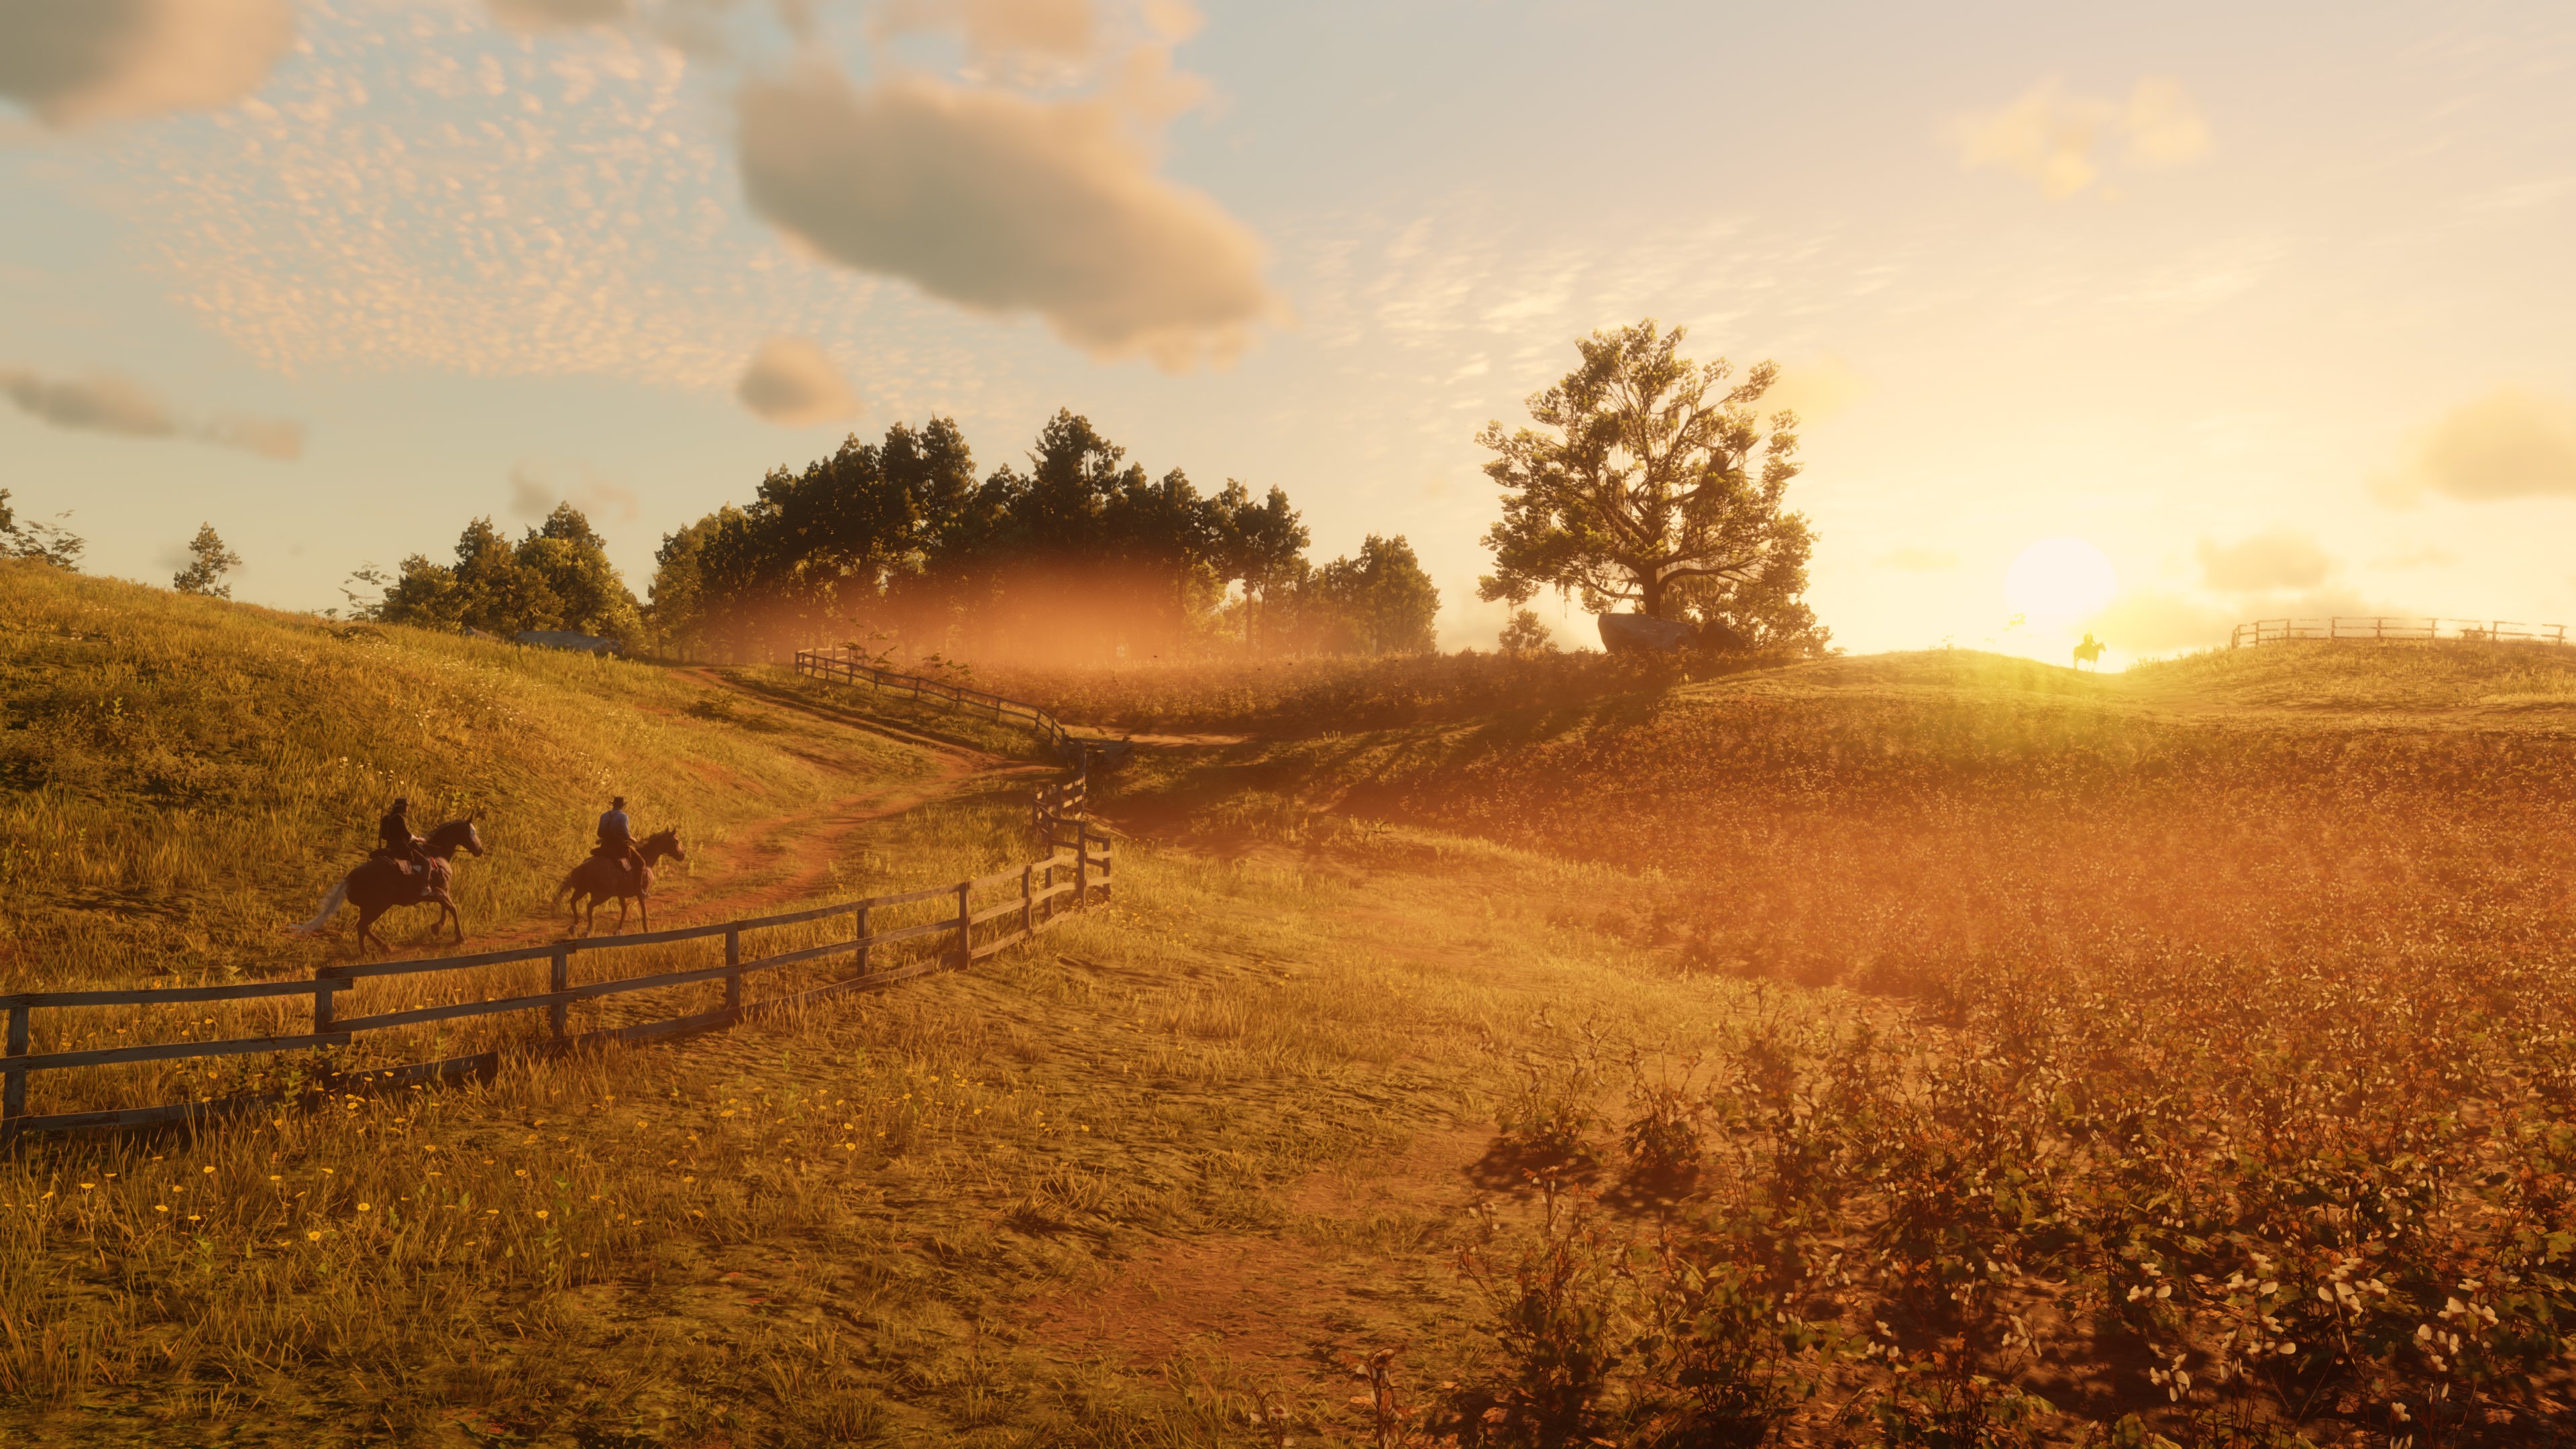 red dead redemption 2 pc photo mode